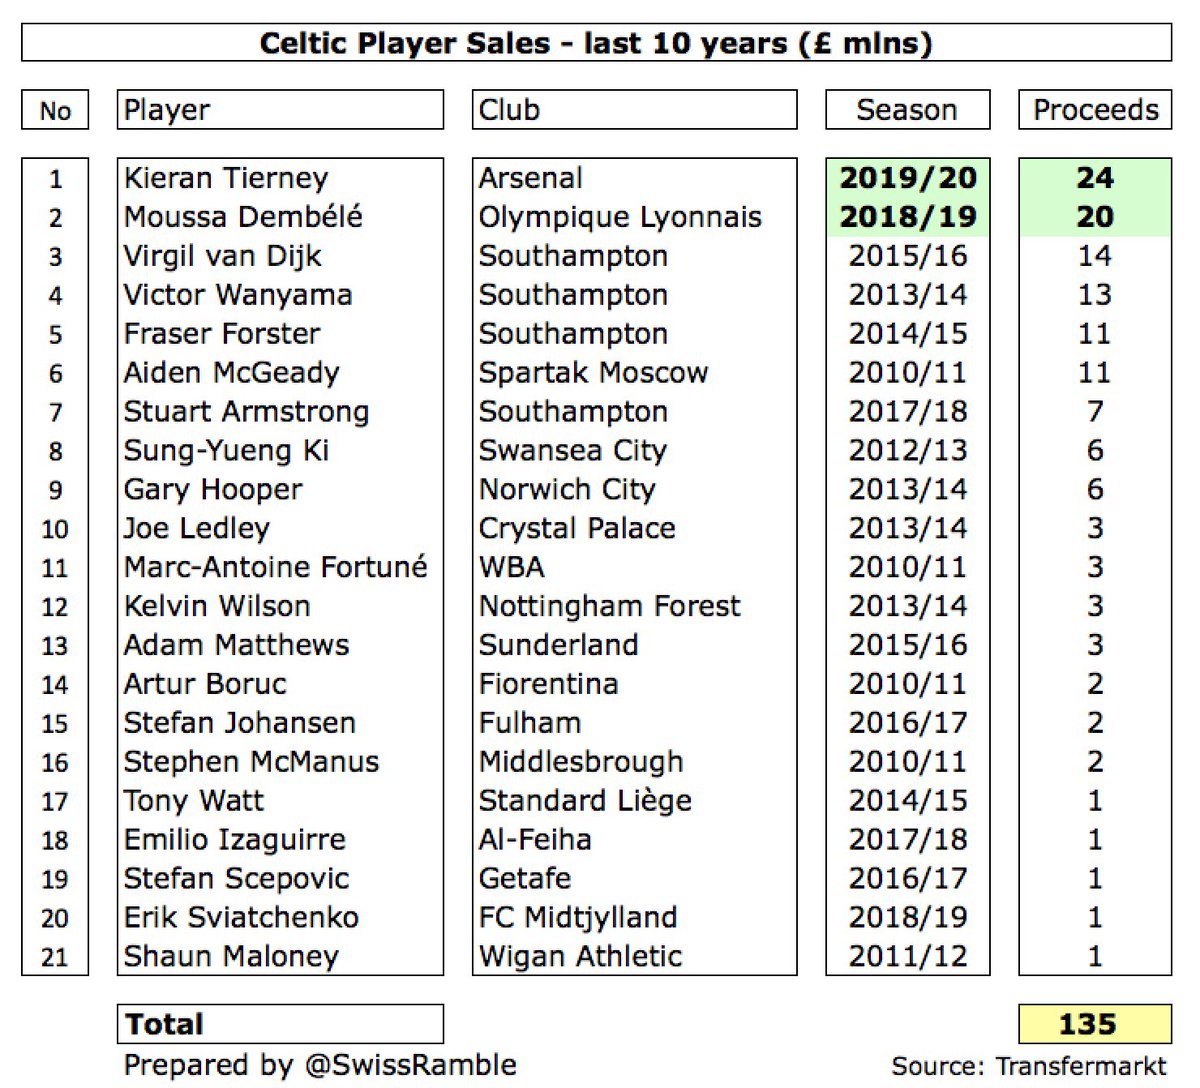 The two  #CelticFC player sales that have generated the highest proceeds both came in the last two seasons: Tierney to Arsenal £24m and Moussa Dembélé to Lyon £20m. Southampton have proved a lucrative market with four sales over £7m to the South coast club.